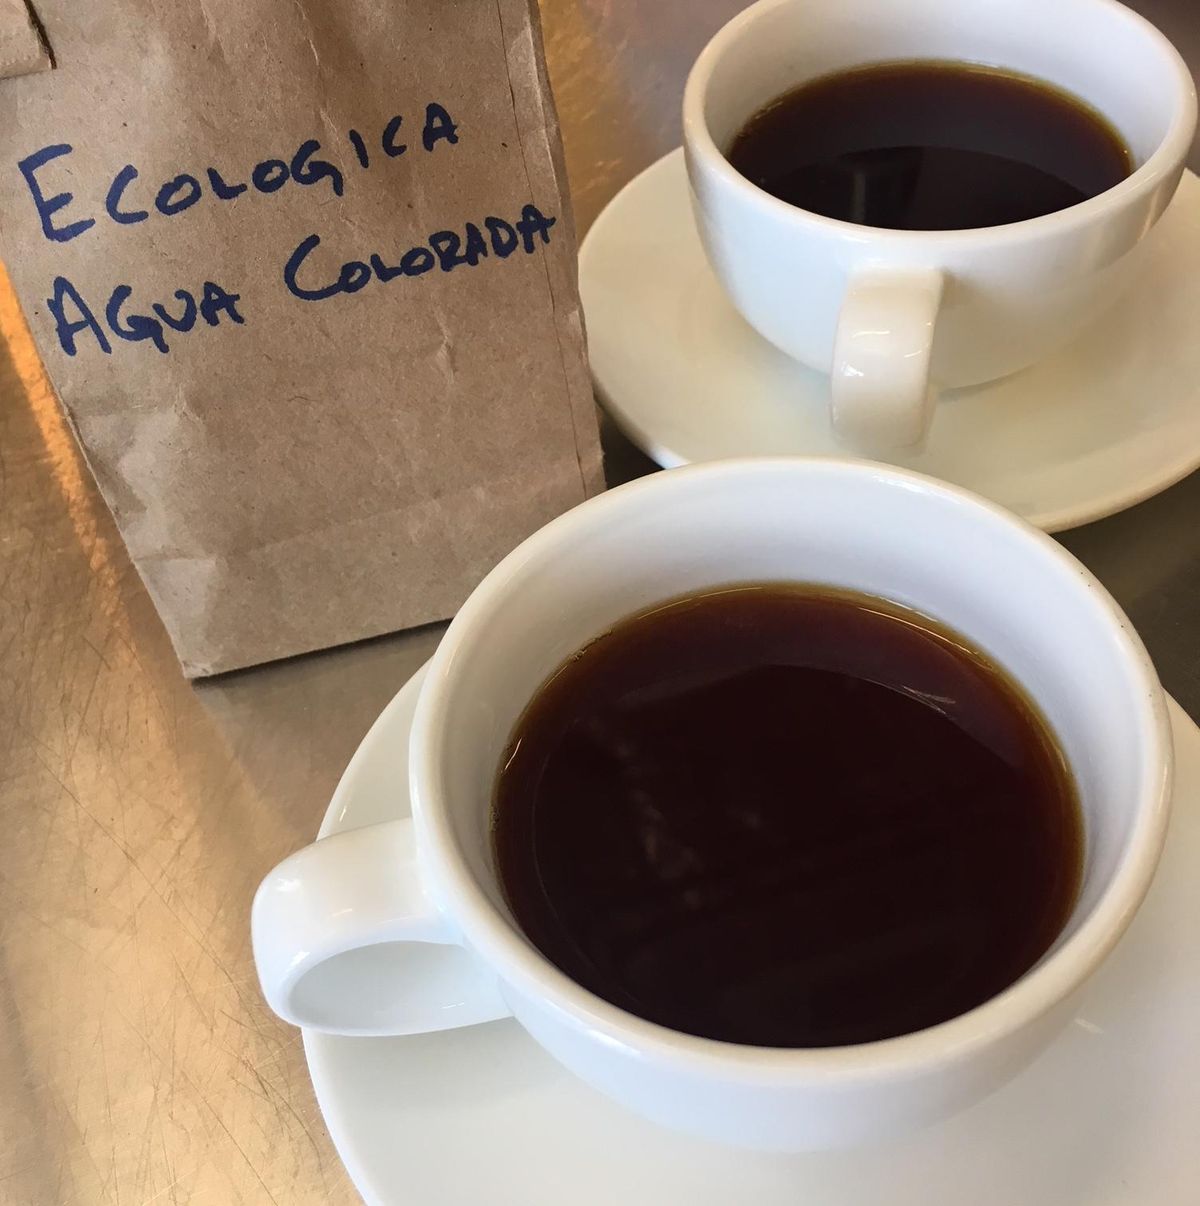 Roast House is offering this highly rated Cup of Excellence coffee from Peru for a limited time. (Adriana Janovich)